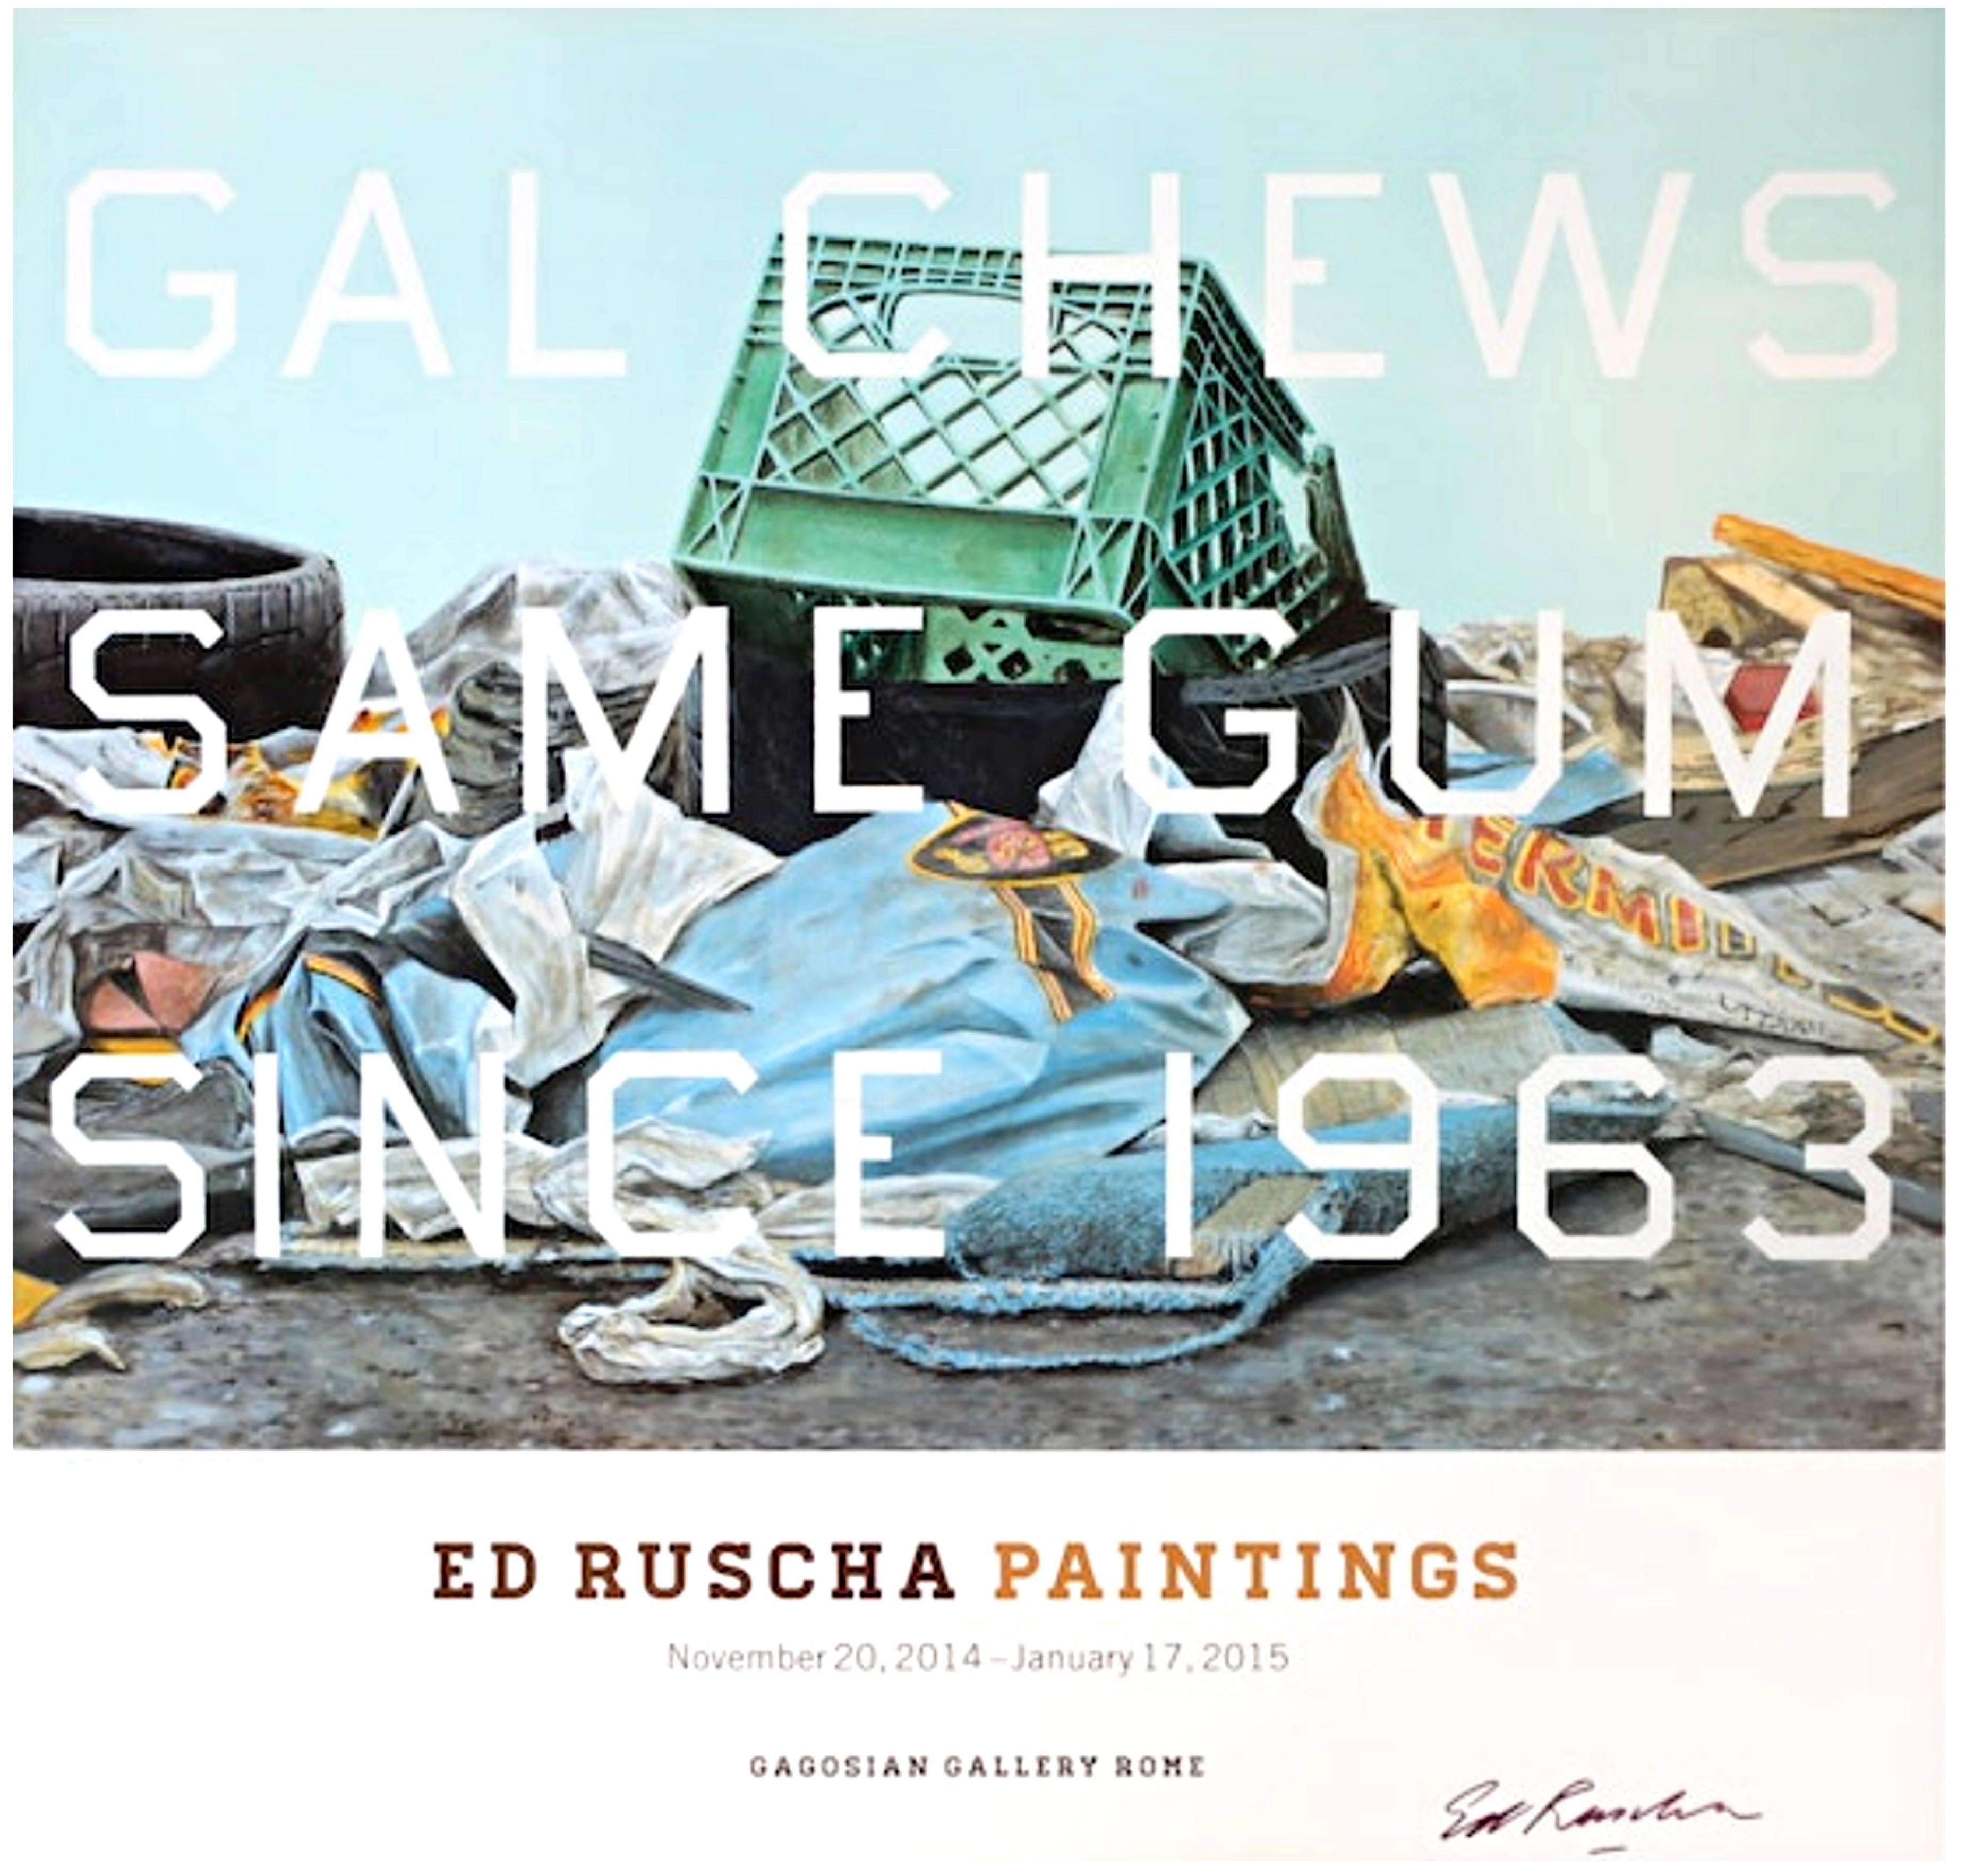 Gal Chews Same Gum Since 1965 offset lithograph poster, Hand signed by Ed Ruscha